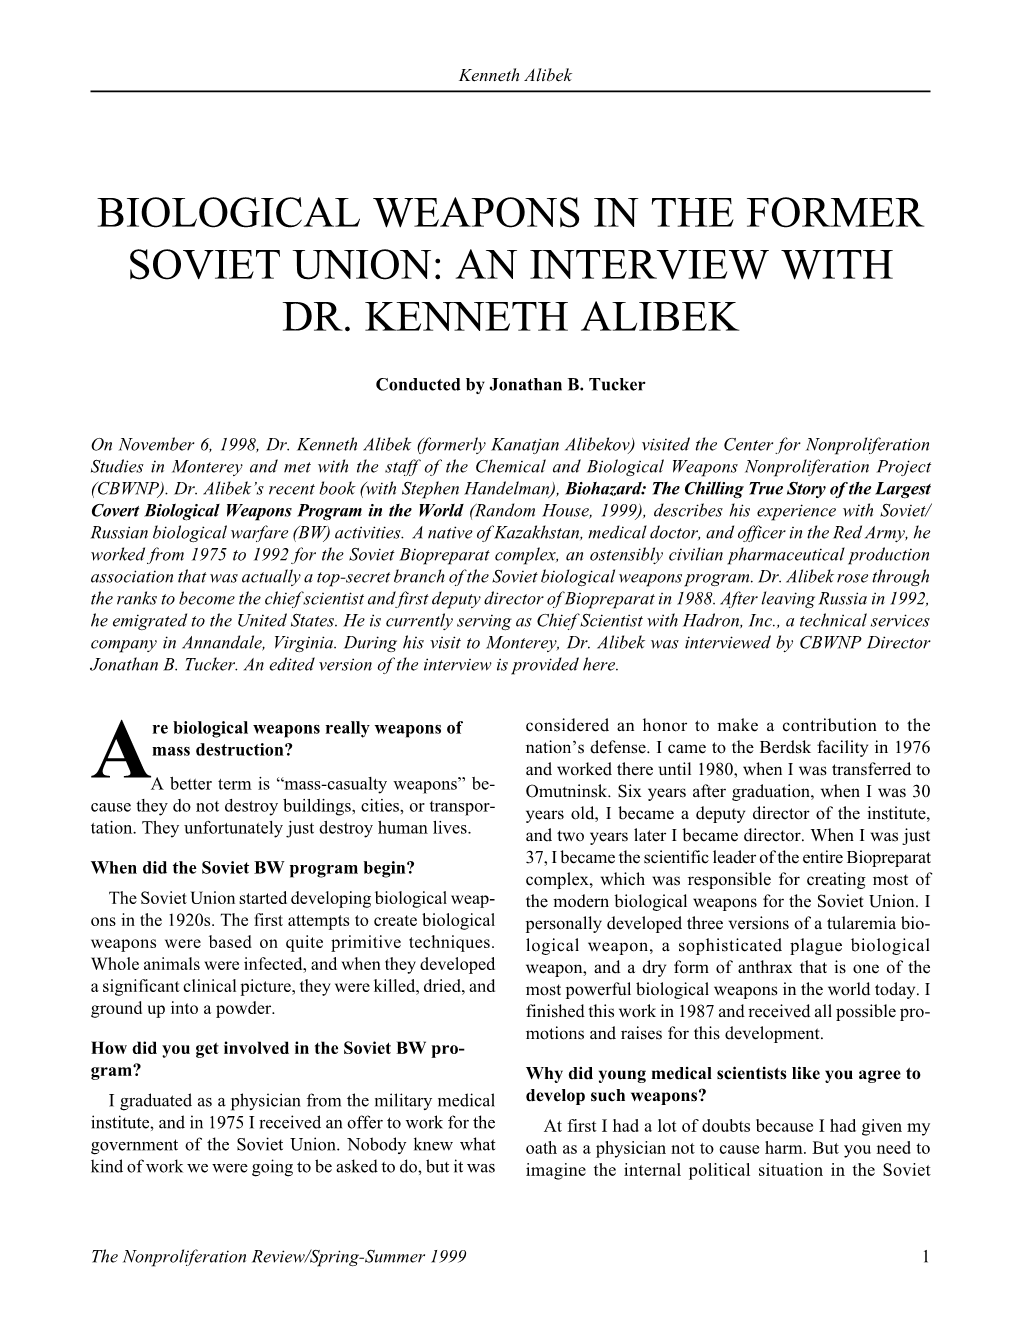 Npr 6.3: Biological Weapons in the Former Soviet Union: An